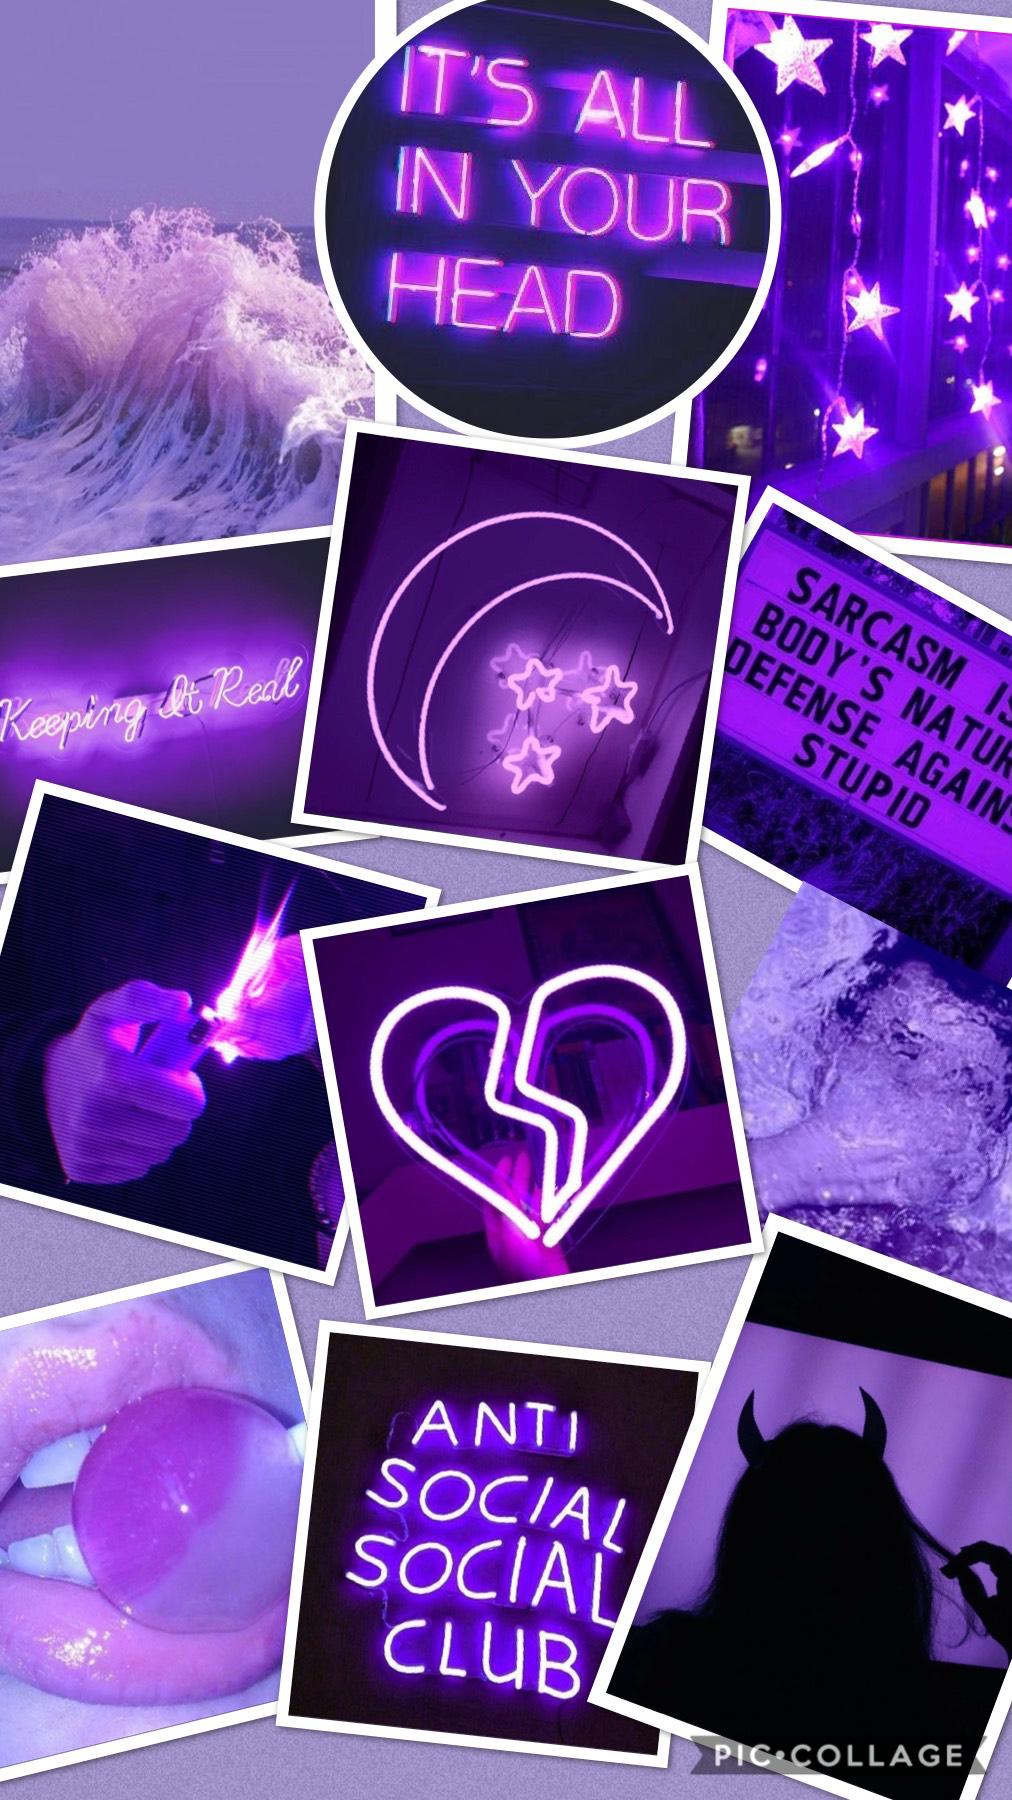 Dark purple wallpaper☔️
This wallpaper is supposed to represent sadness but in a Beautiful way. It doesn’t make sense but hope you like it
Pictures: Pinterest